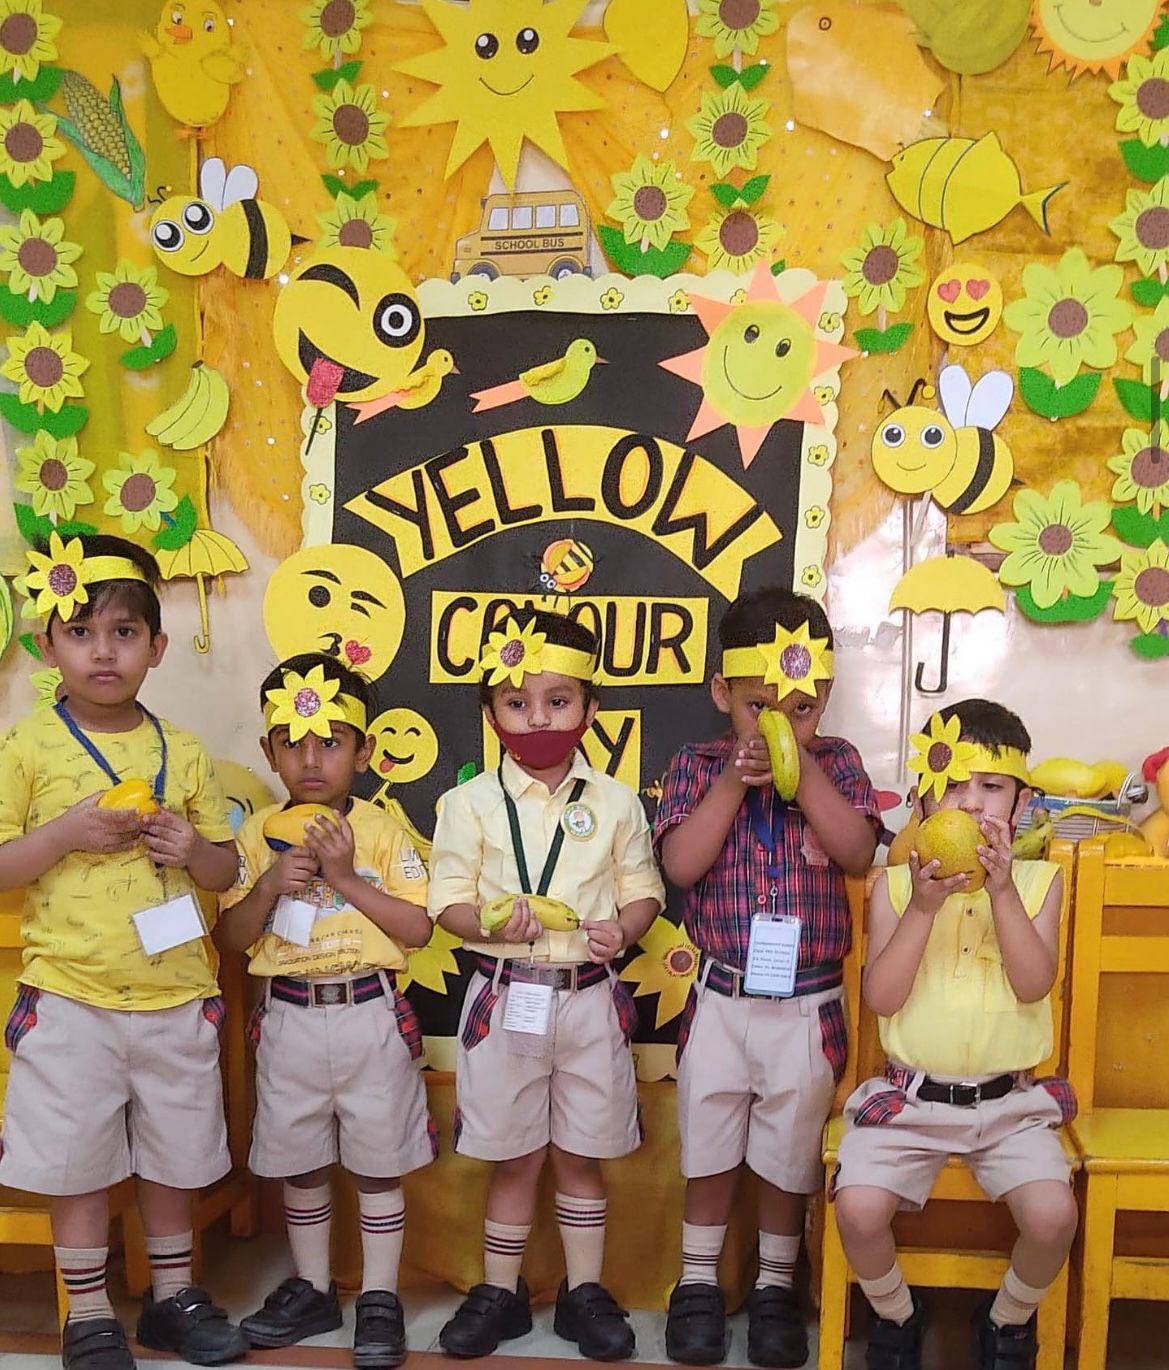 On May 17, 2022, the tiny tots of DAV RK Puram celebrated “YELLOW DAY” with the goal of educating children about the colour yellow.